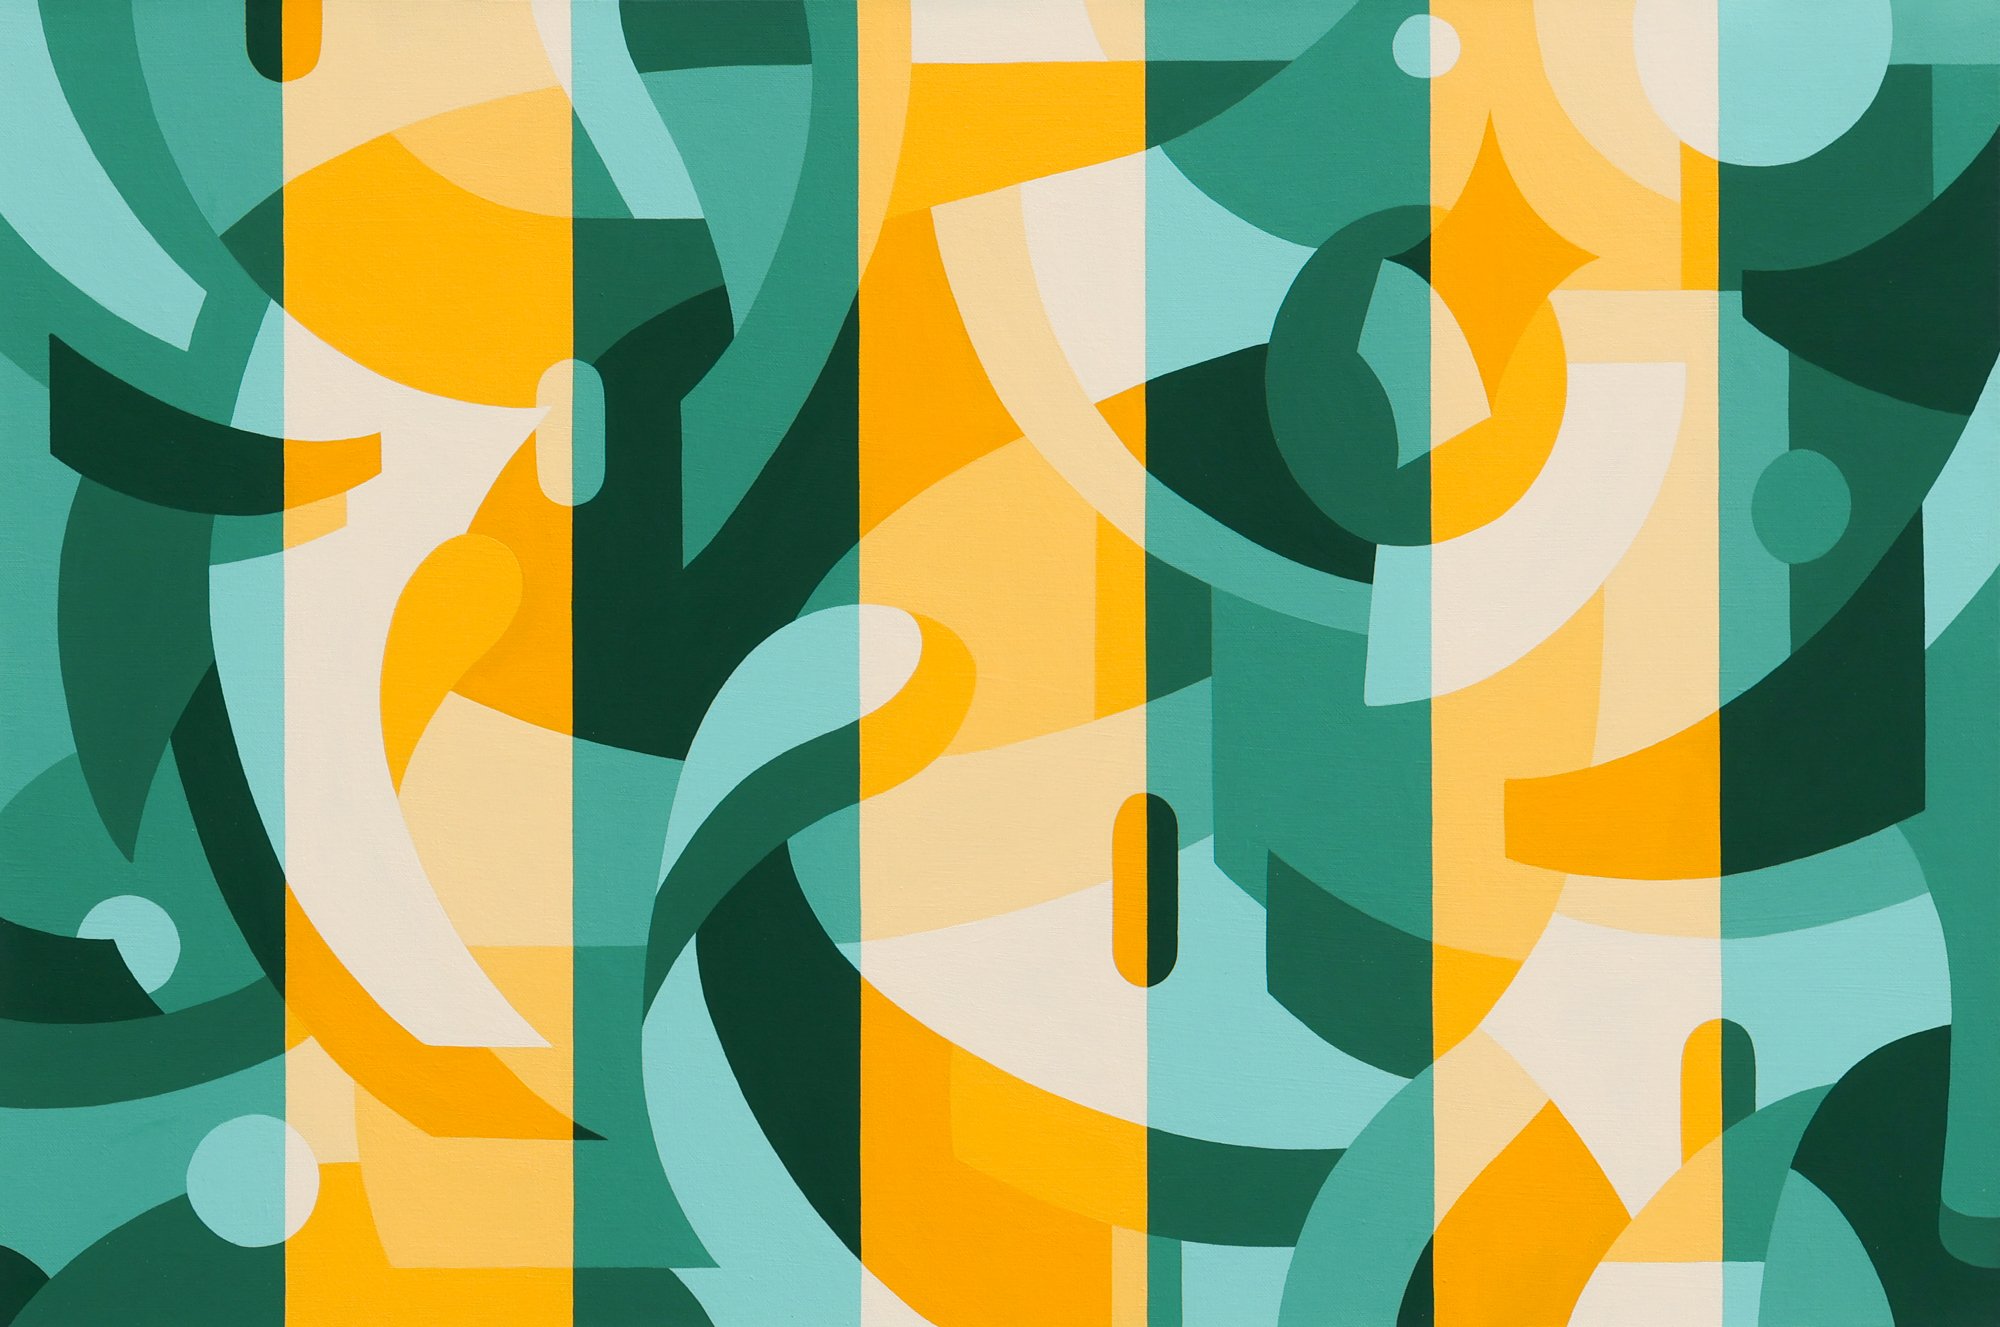 'Open Season' original abstract geometric painting in shades of green and yellow by Will Gebhard for Soapbox Arts Gallery in Burlington, VT